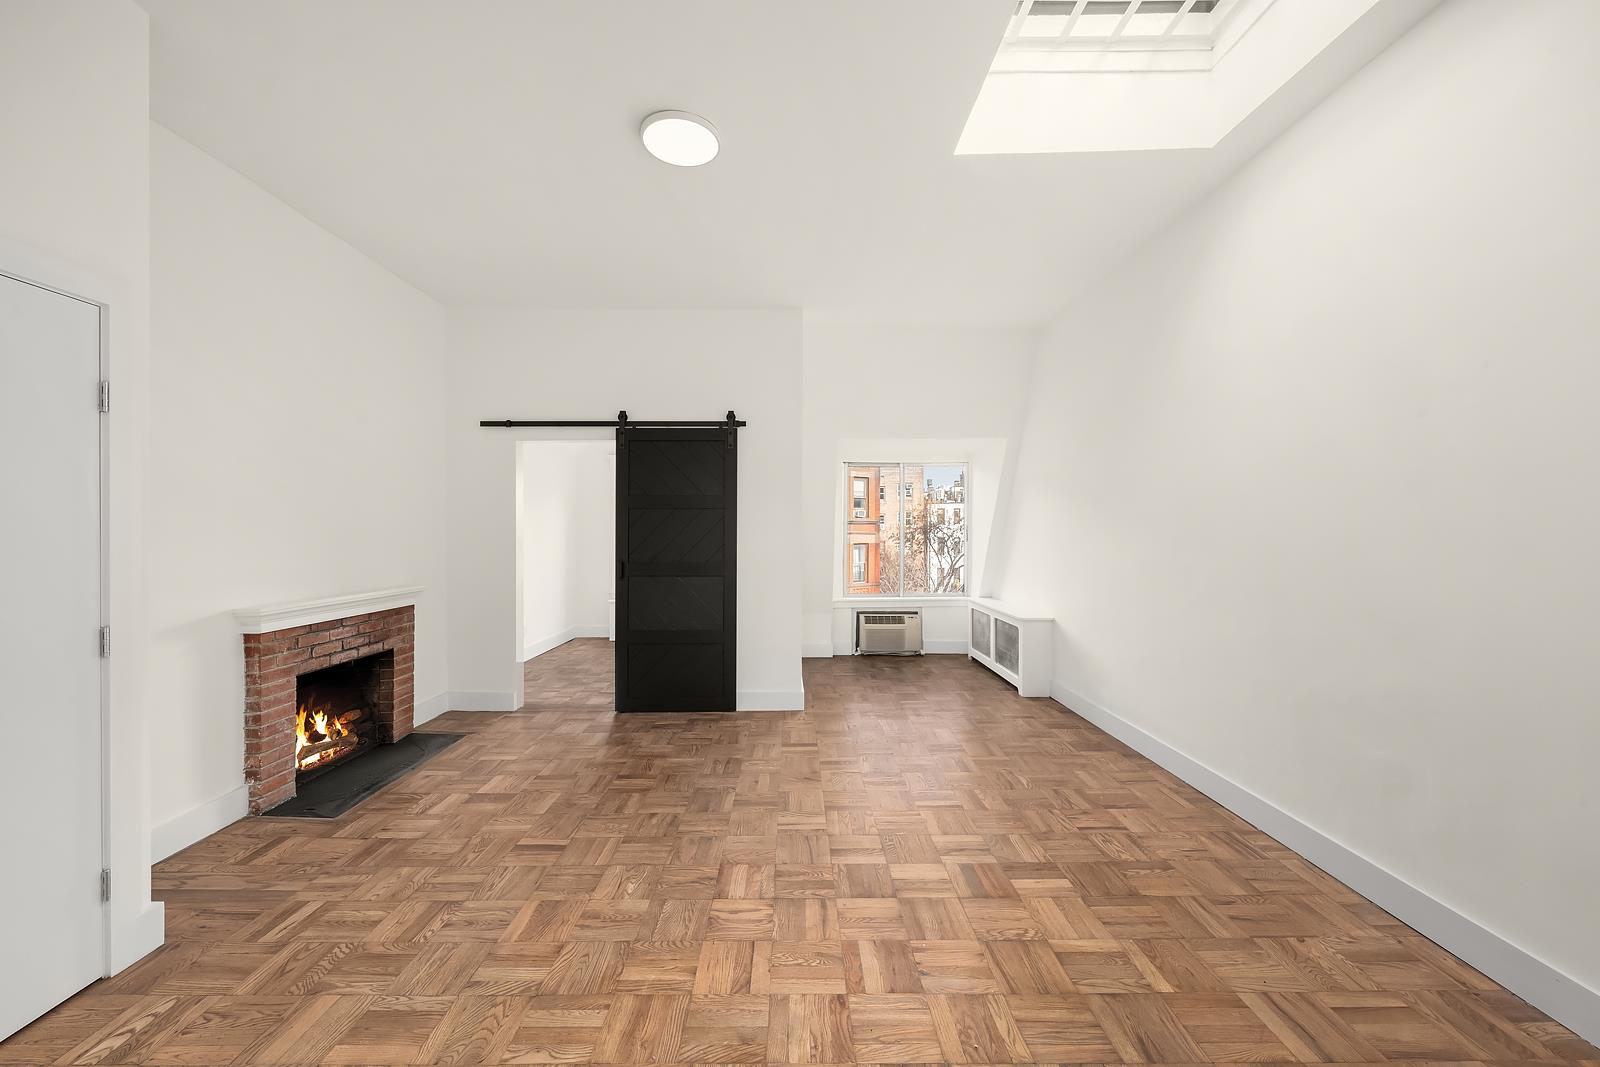 a view of empty room with a fireplace